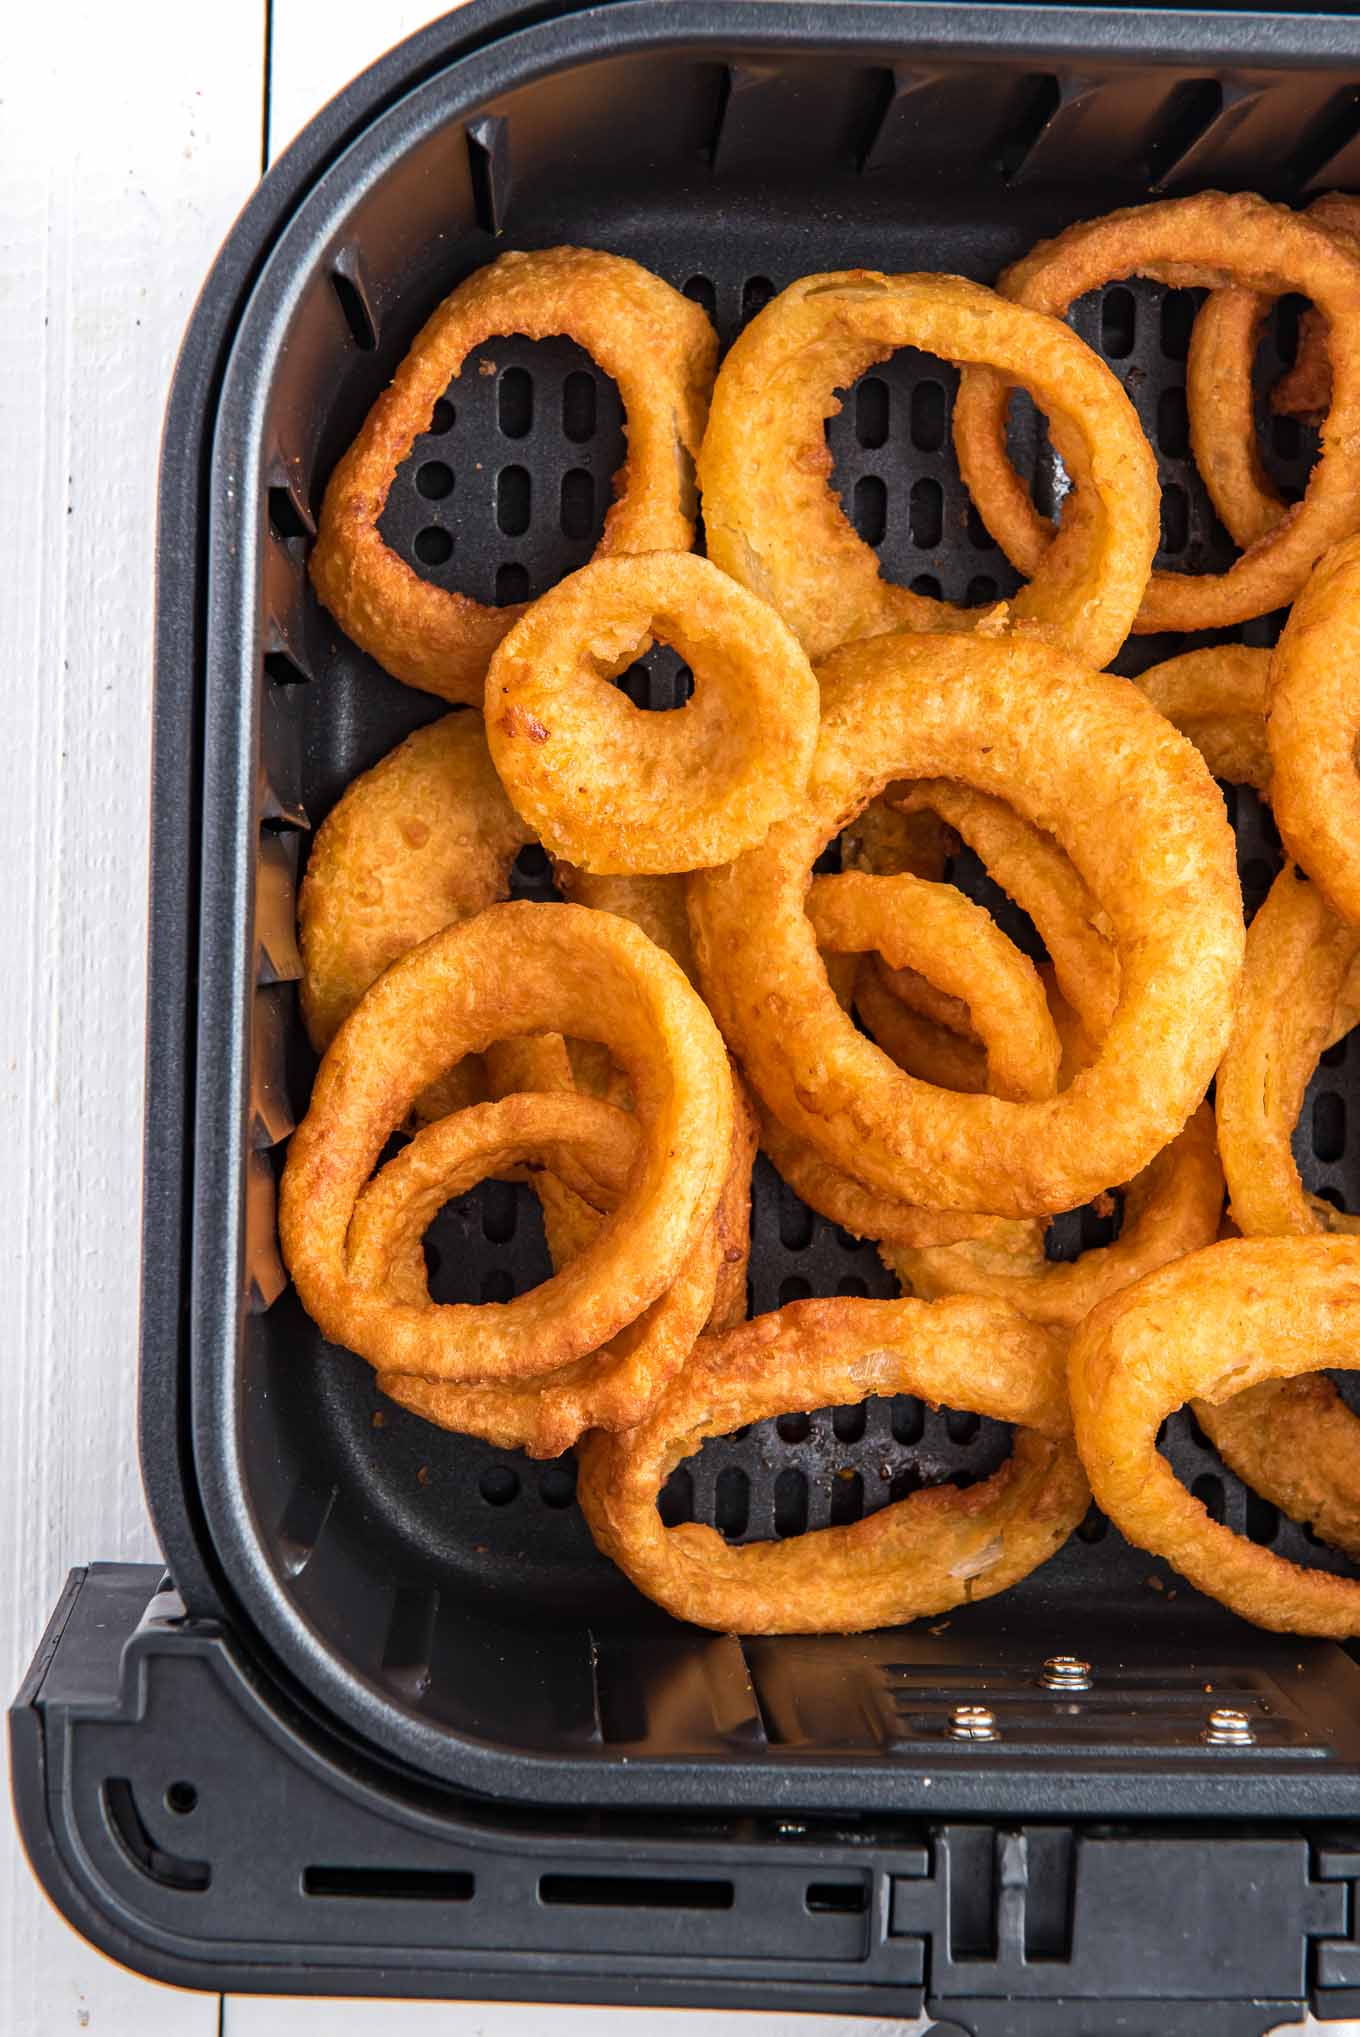 Onion rings are placed in a single layer in the air fryer basket.